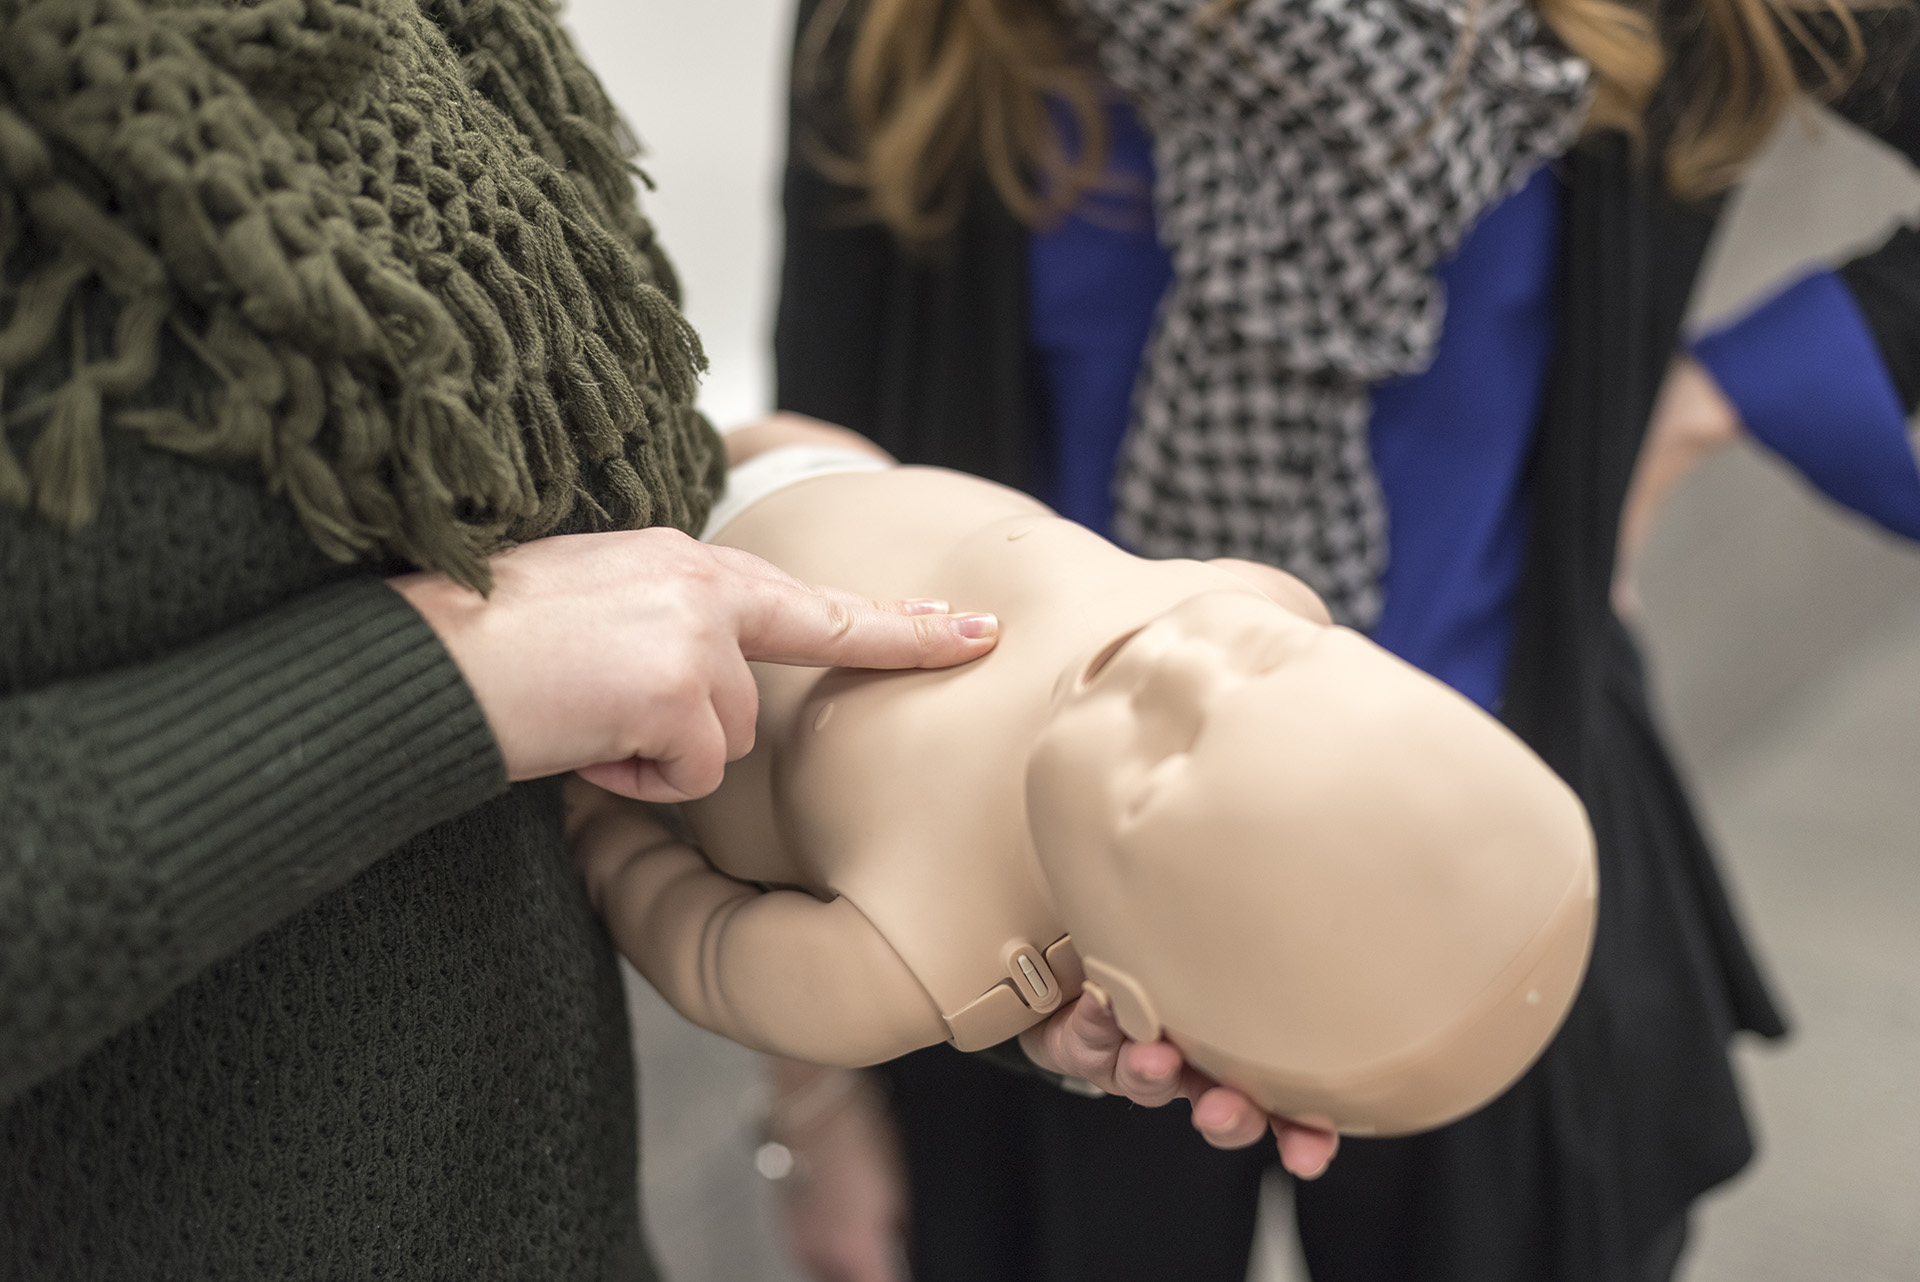 Students working with baby cpr manikin